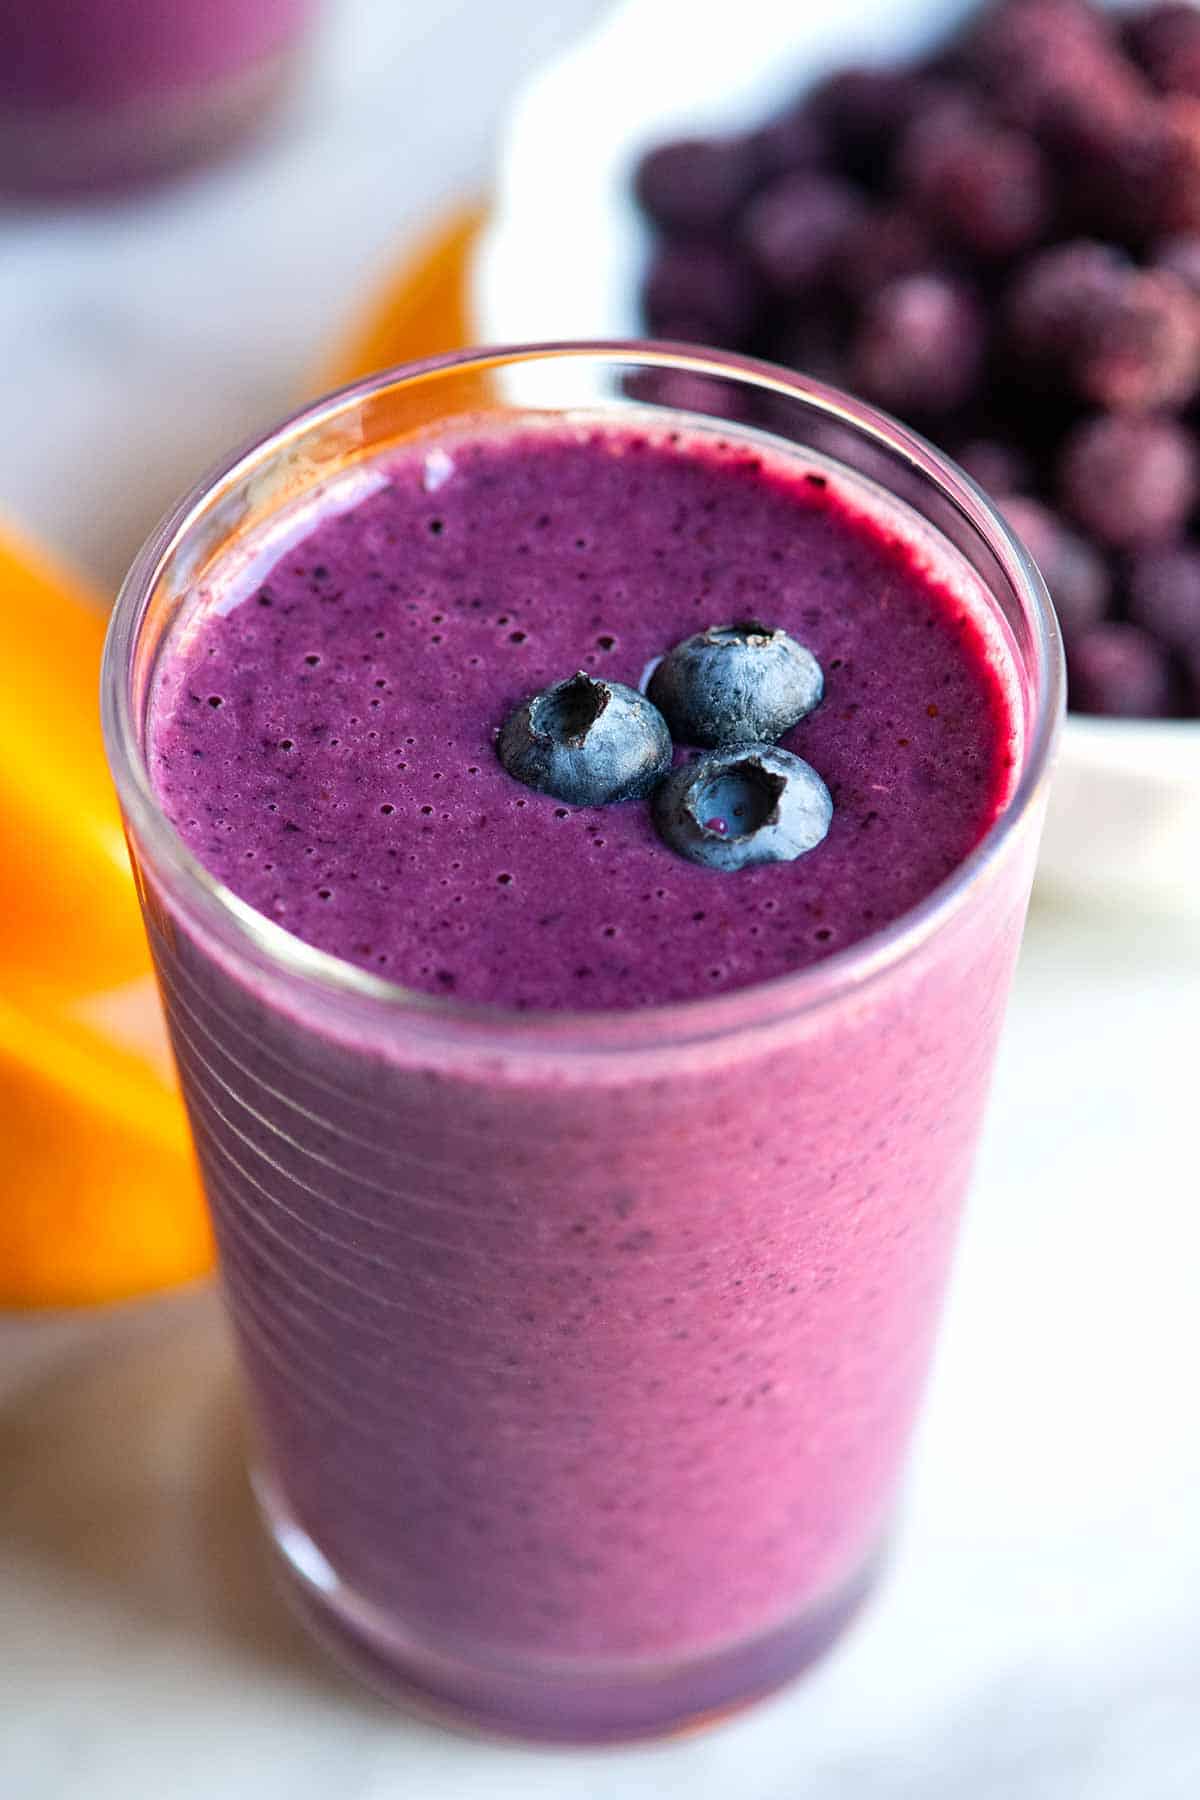 what fruit goes with blueberries in a smoothie